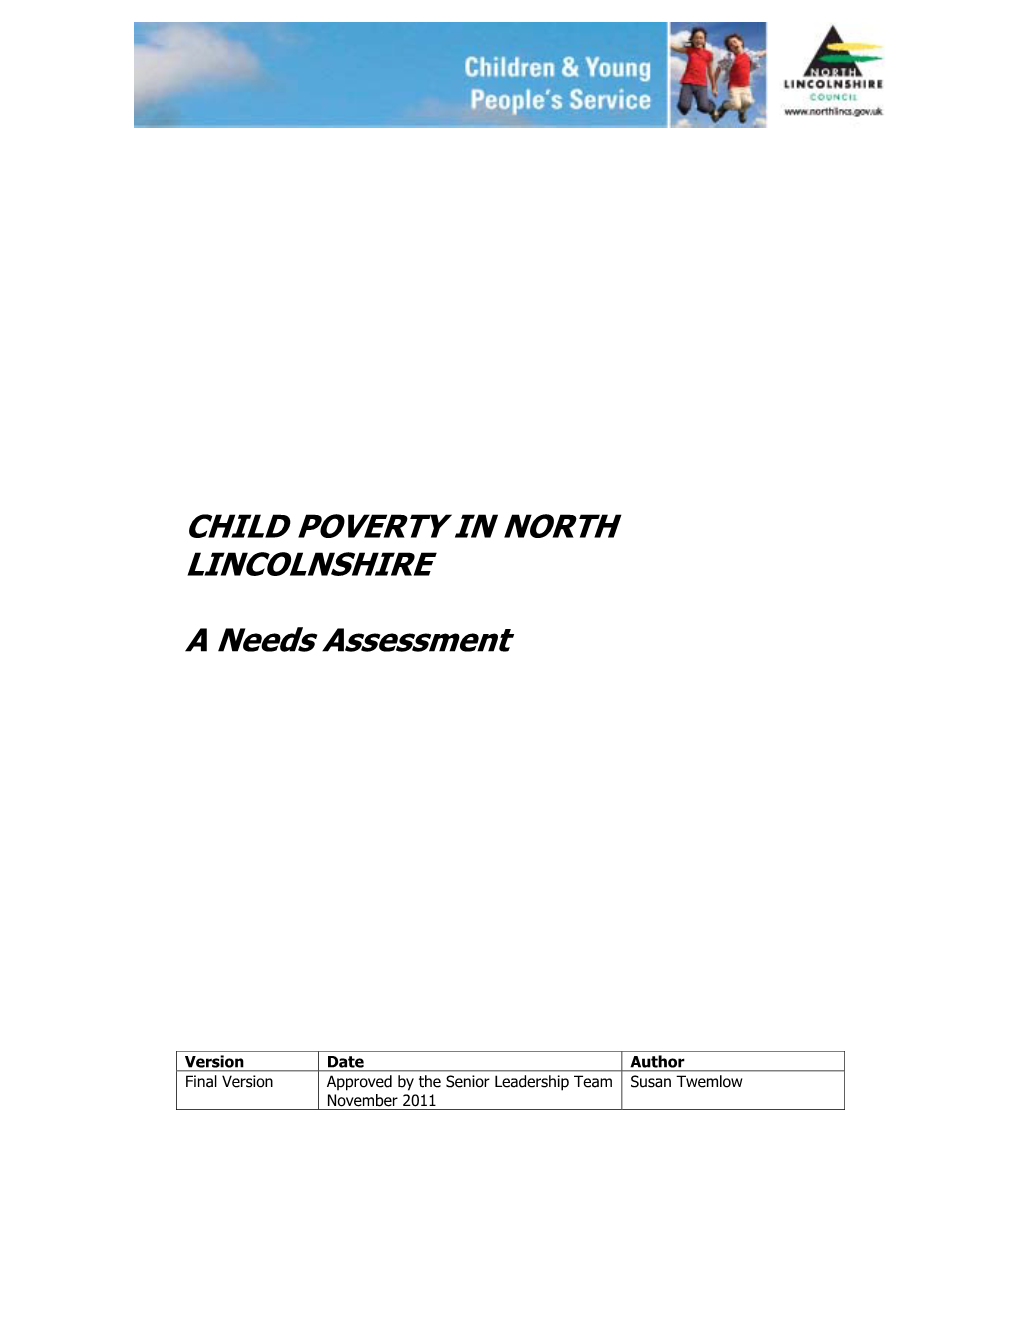 CHILD POVERTY in NORTH LINCOLNSHIRE a Needs